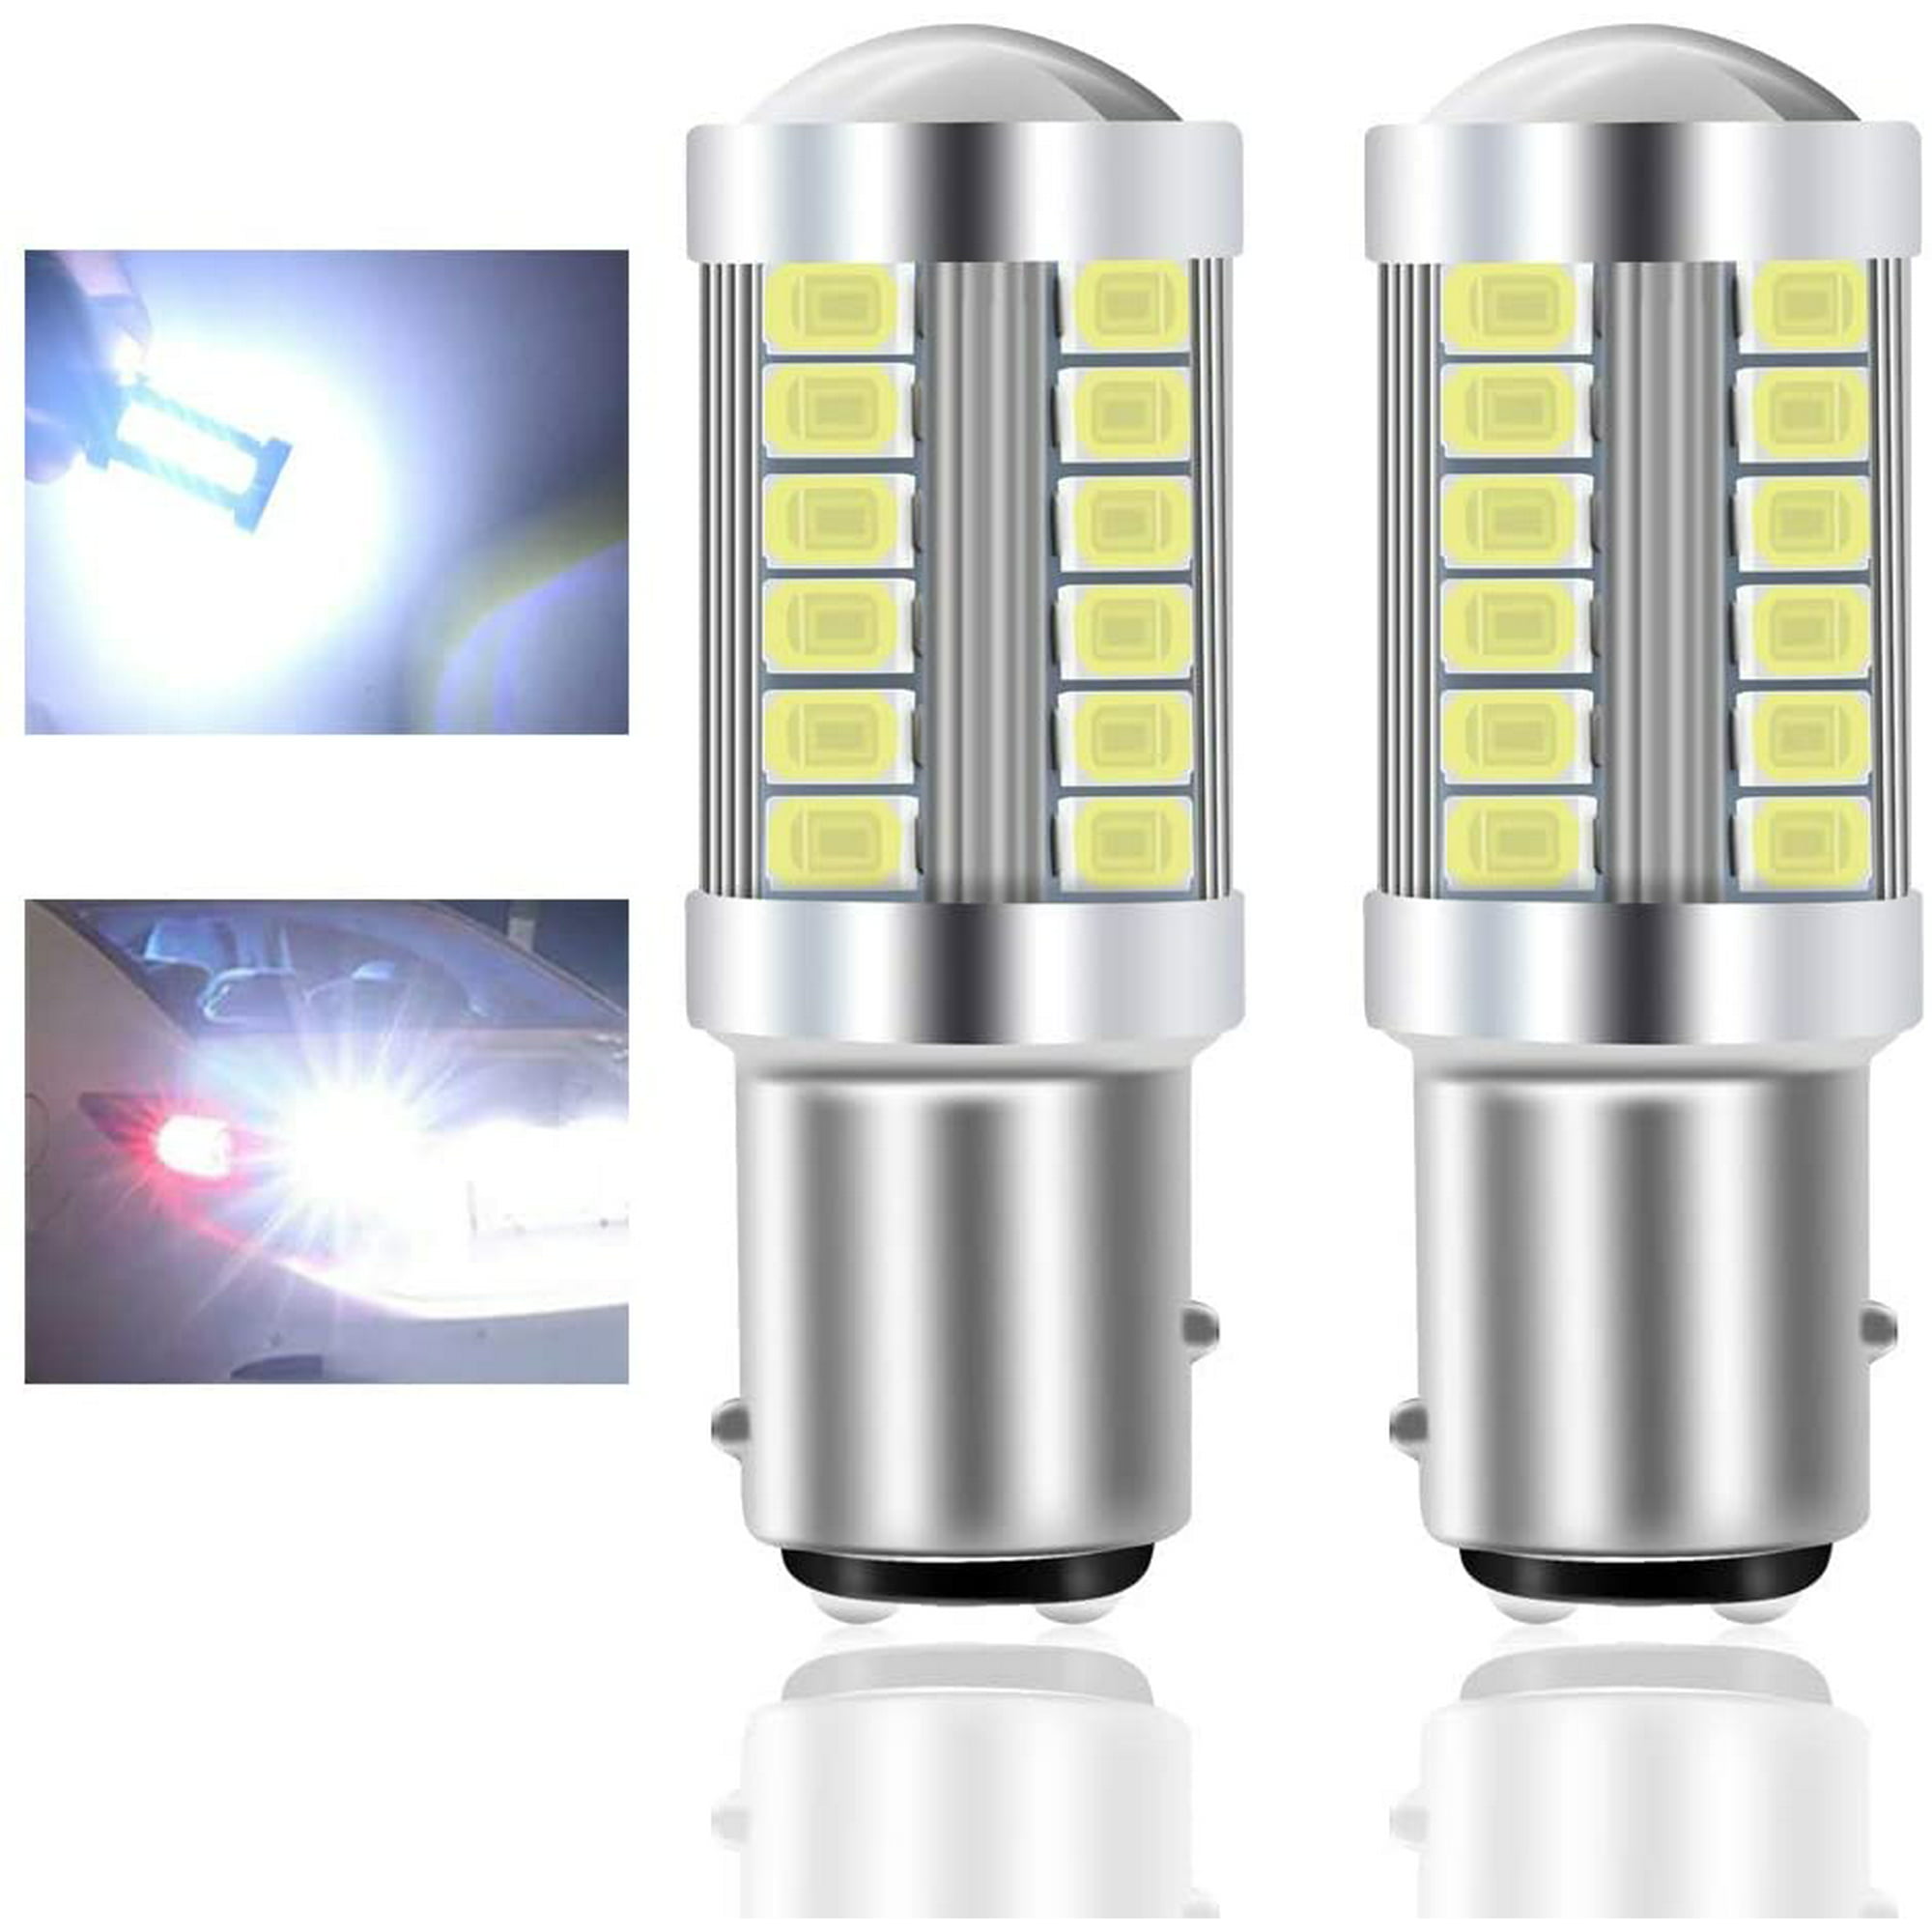 Details about   LED Light 80W 7444 Amber Orange Two Bulbs Rear Turn Signal Replace Upgrade Lamp